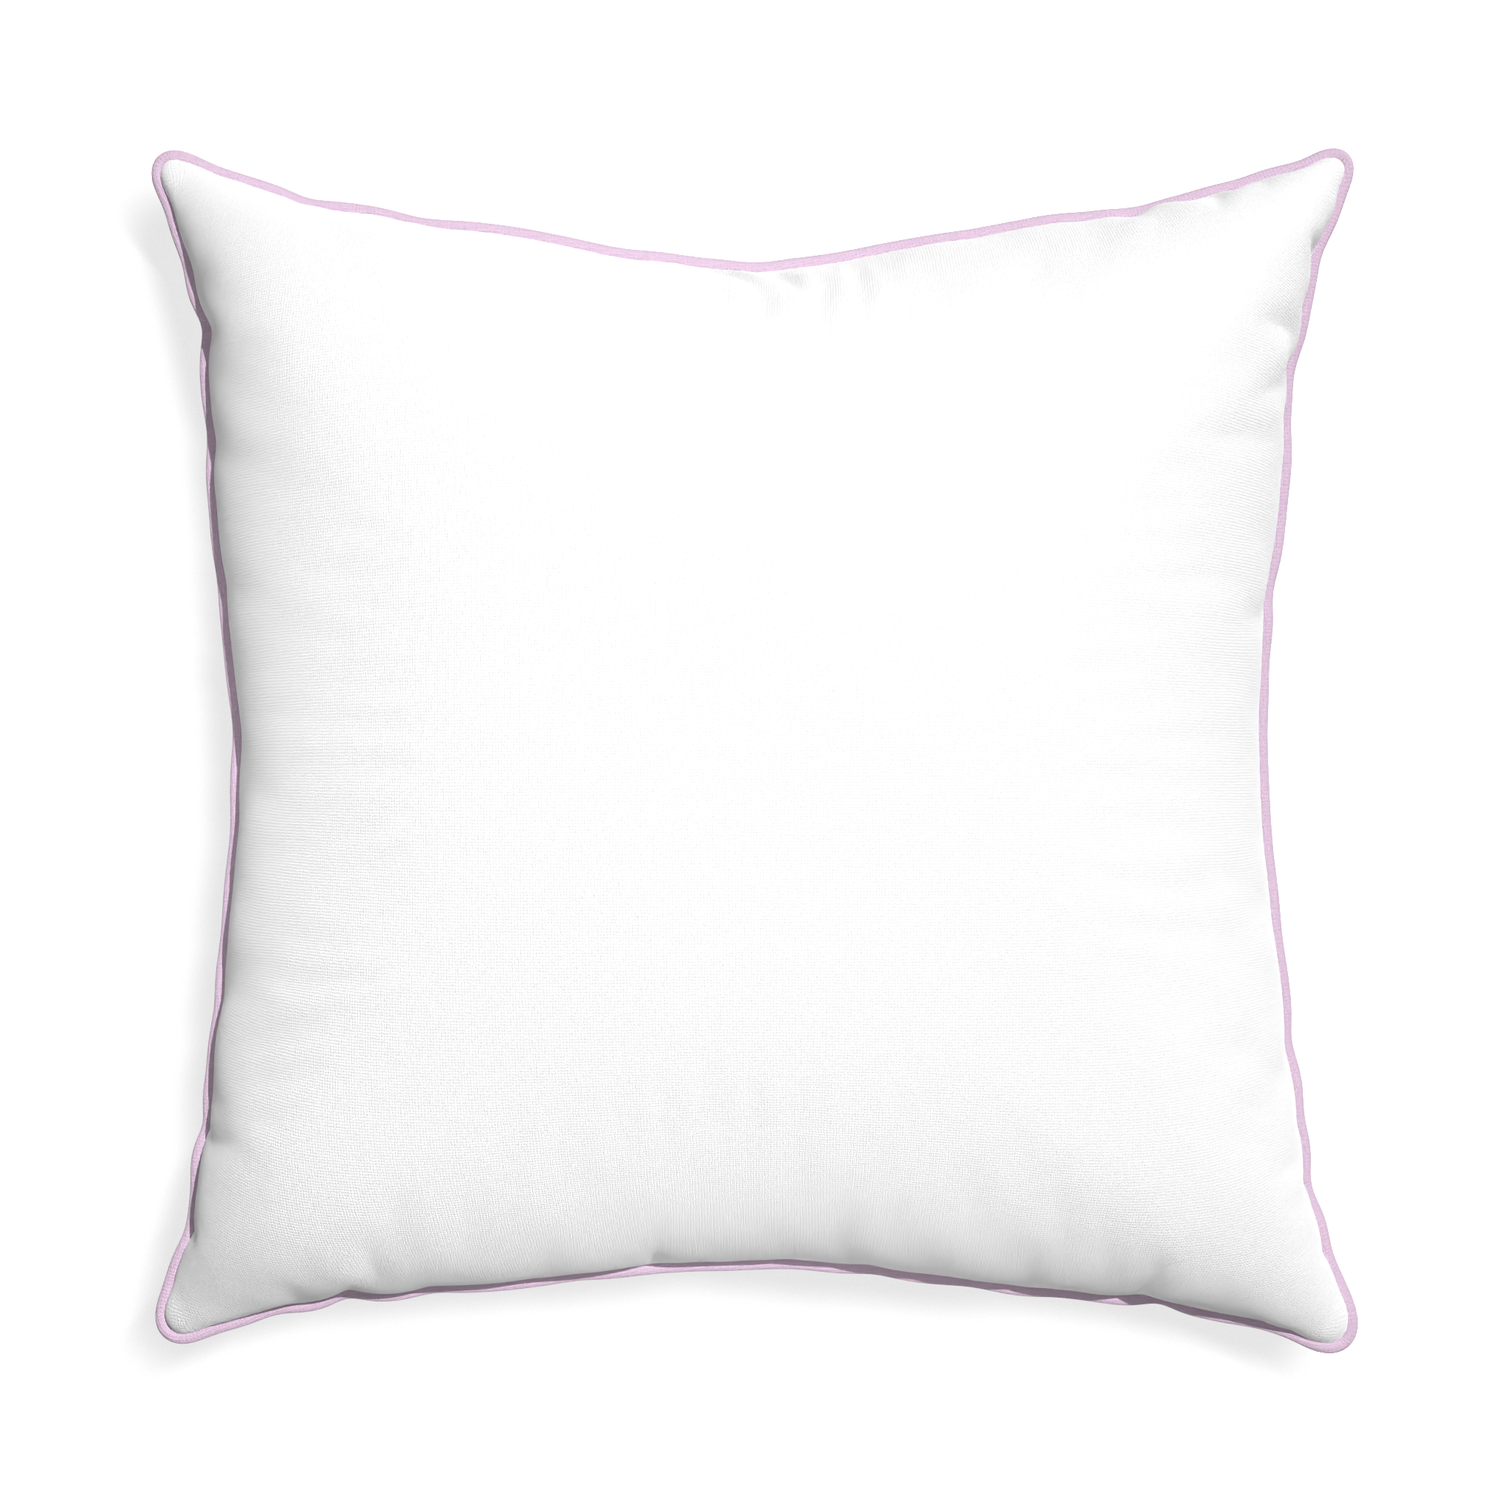 Euro-sham snow custom white cottonpillow with l piping on white background